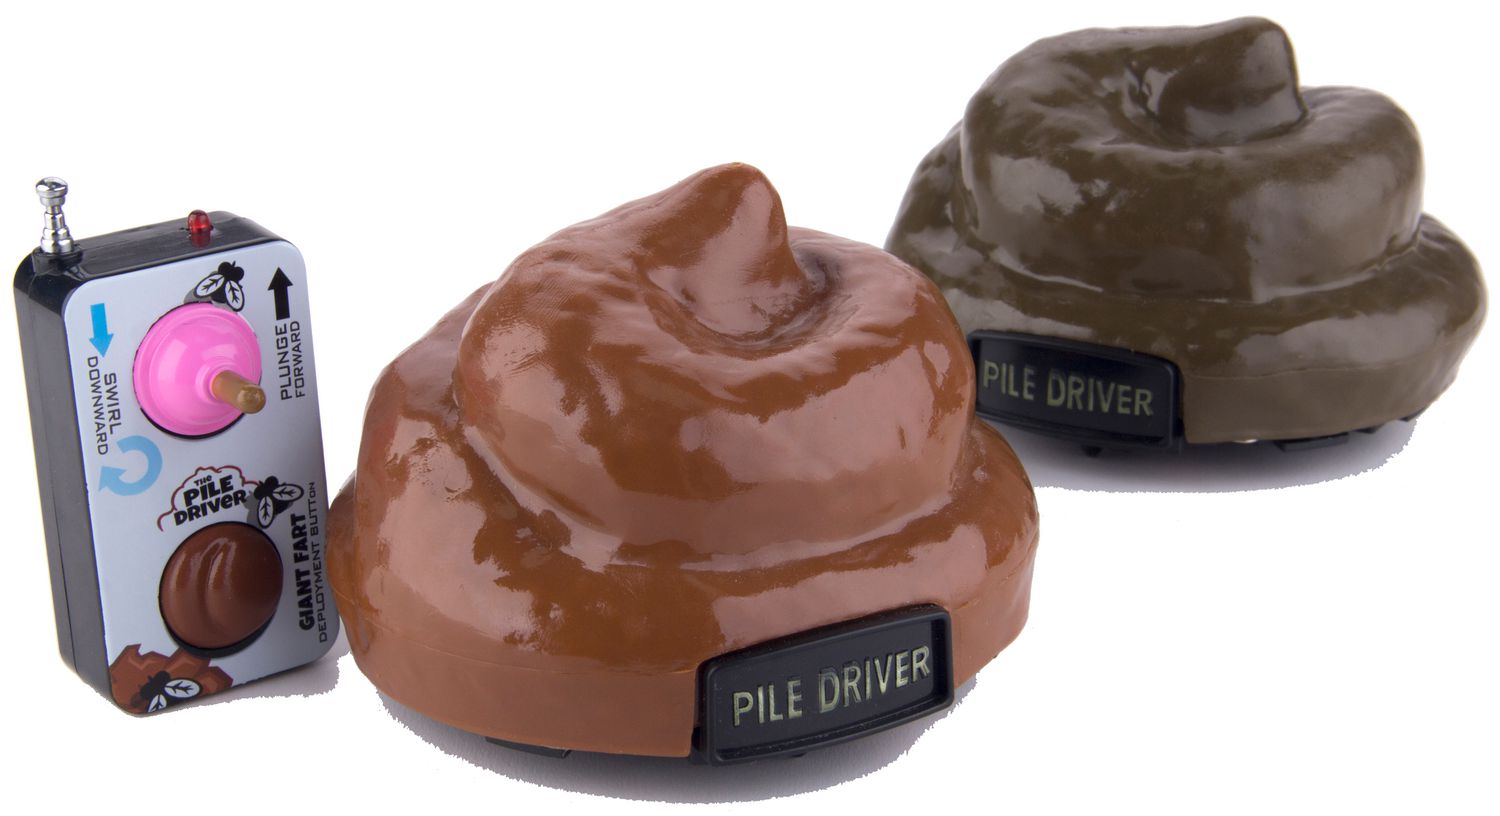 The Pile Driver Remote Controlled Spinning Poop Toy With Fart Sounds 27 MHz for sale online 